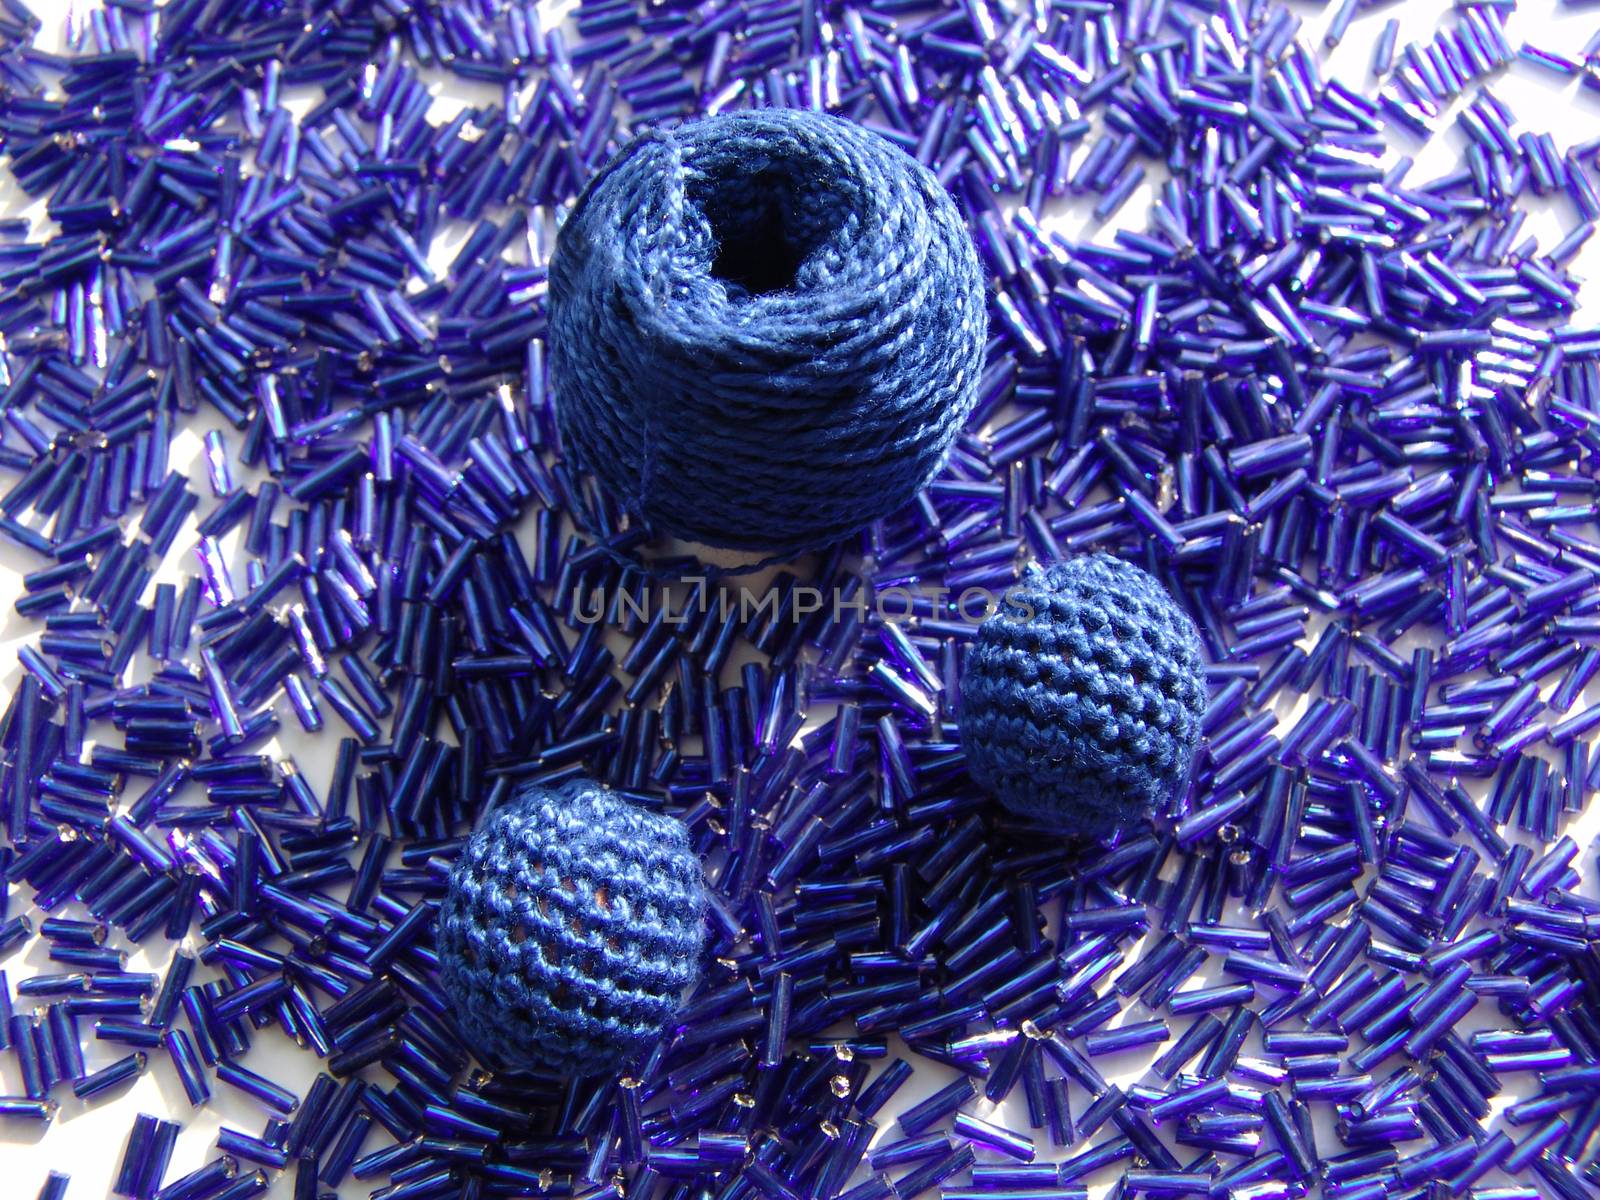 Blue beads and blue yarn by elena_vz